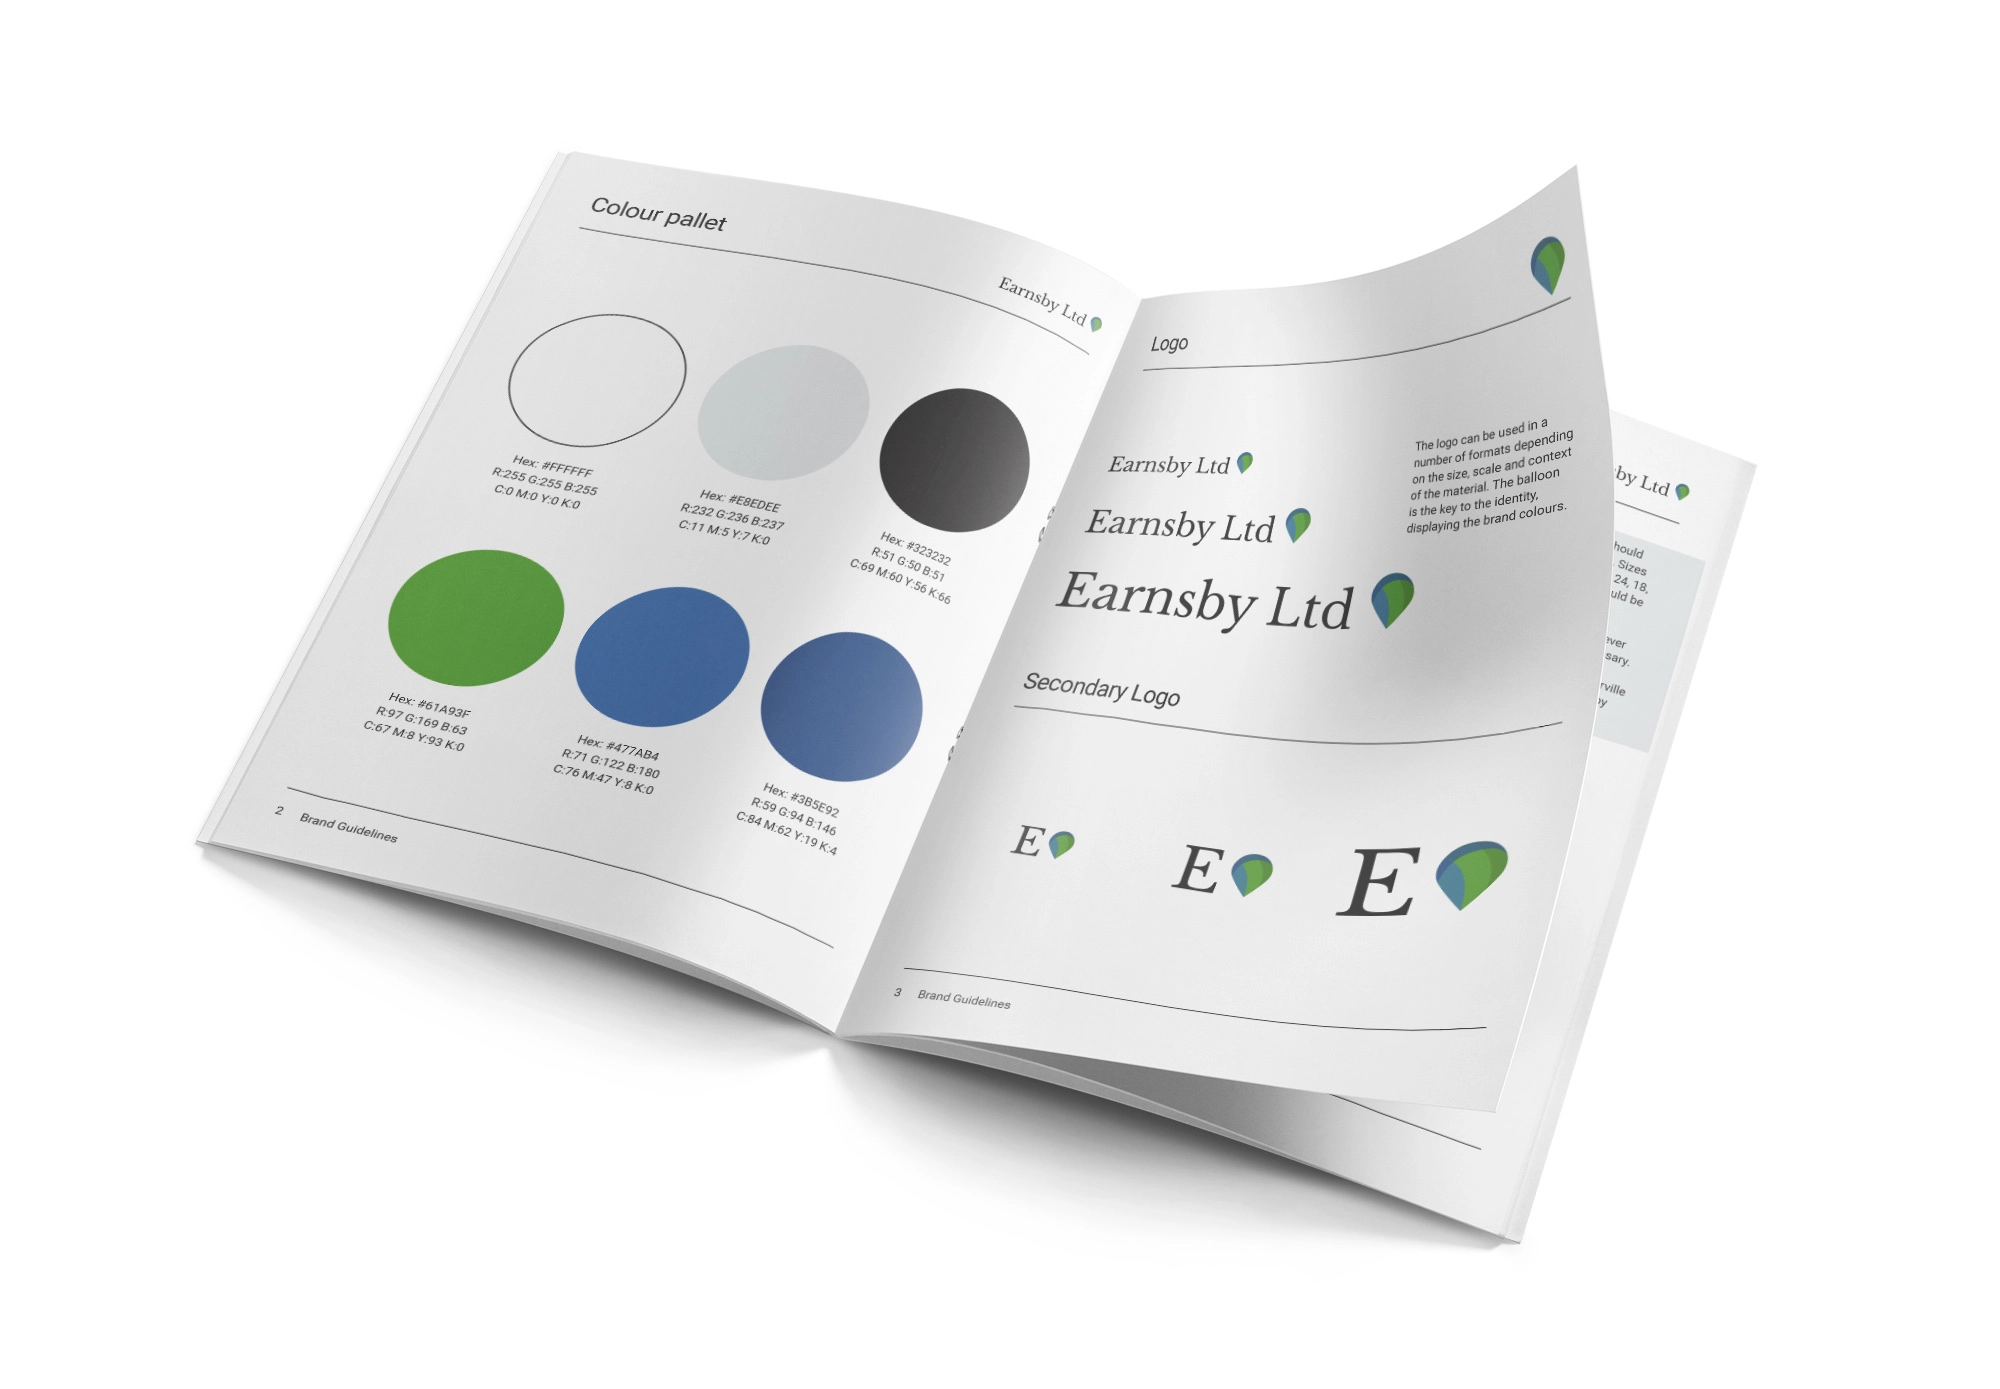 Mockup of Earnsby Ltd brand guidelines